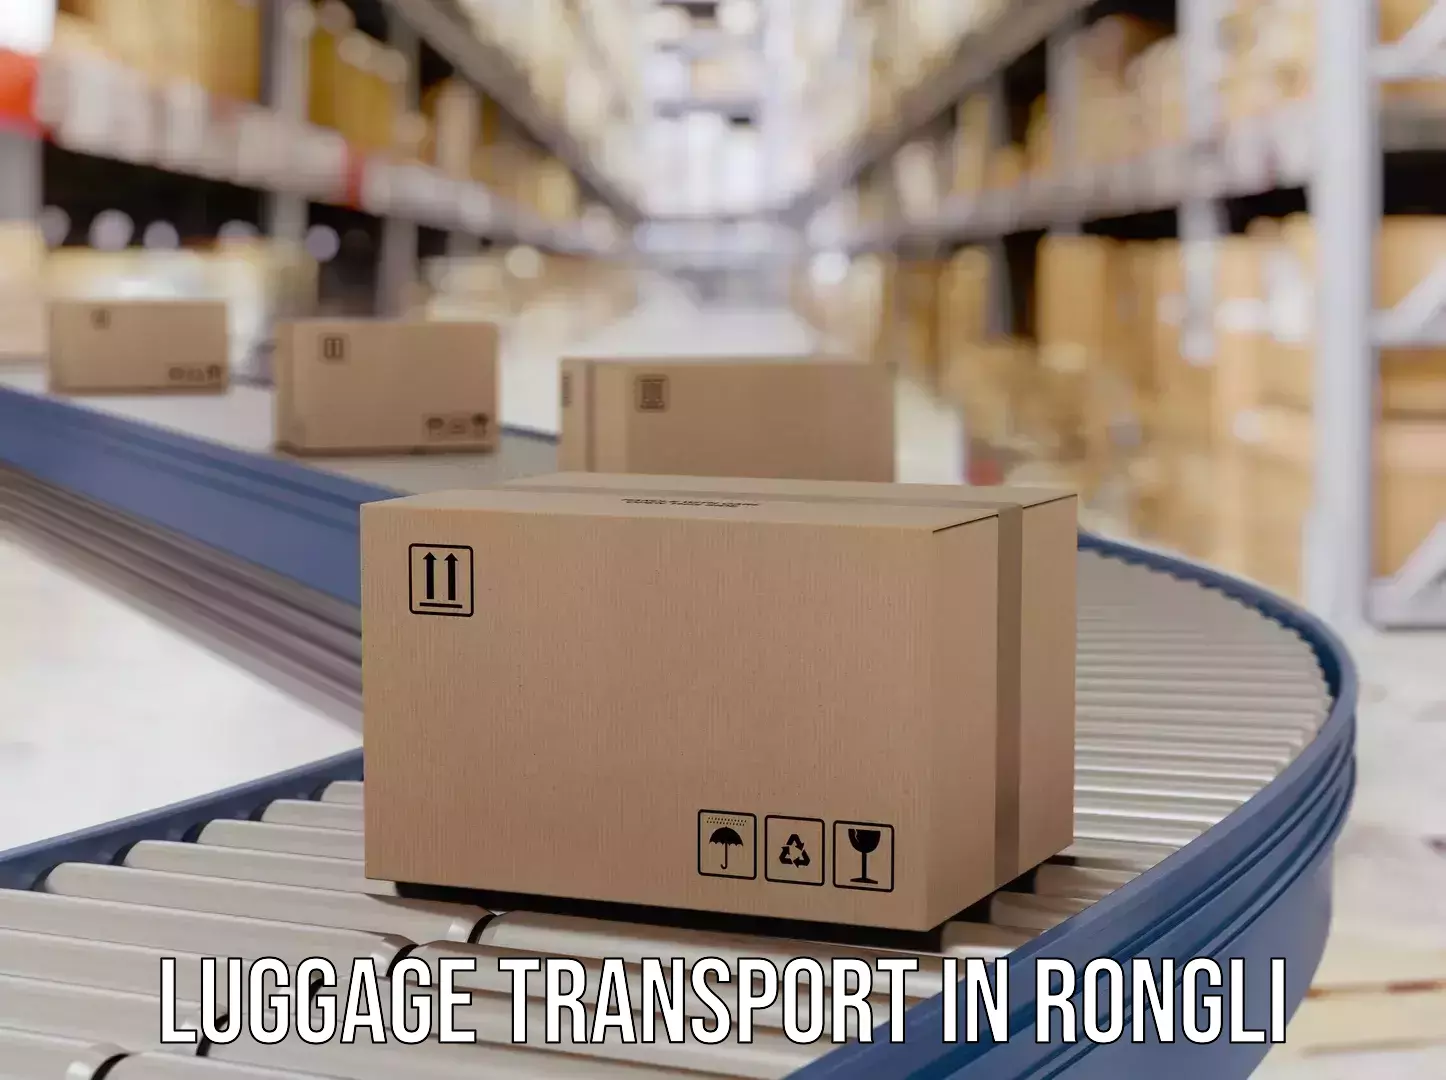 Luggage transport tips in Rongli